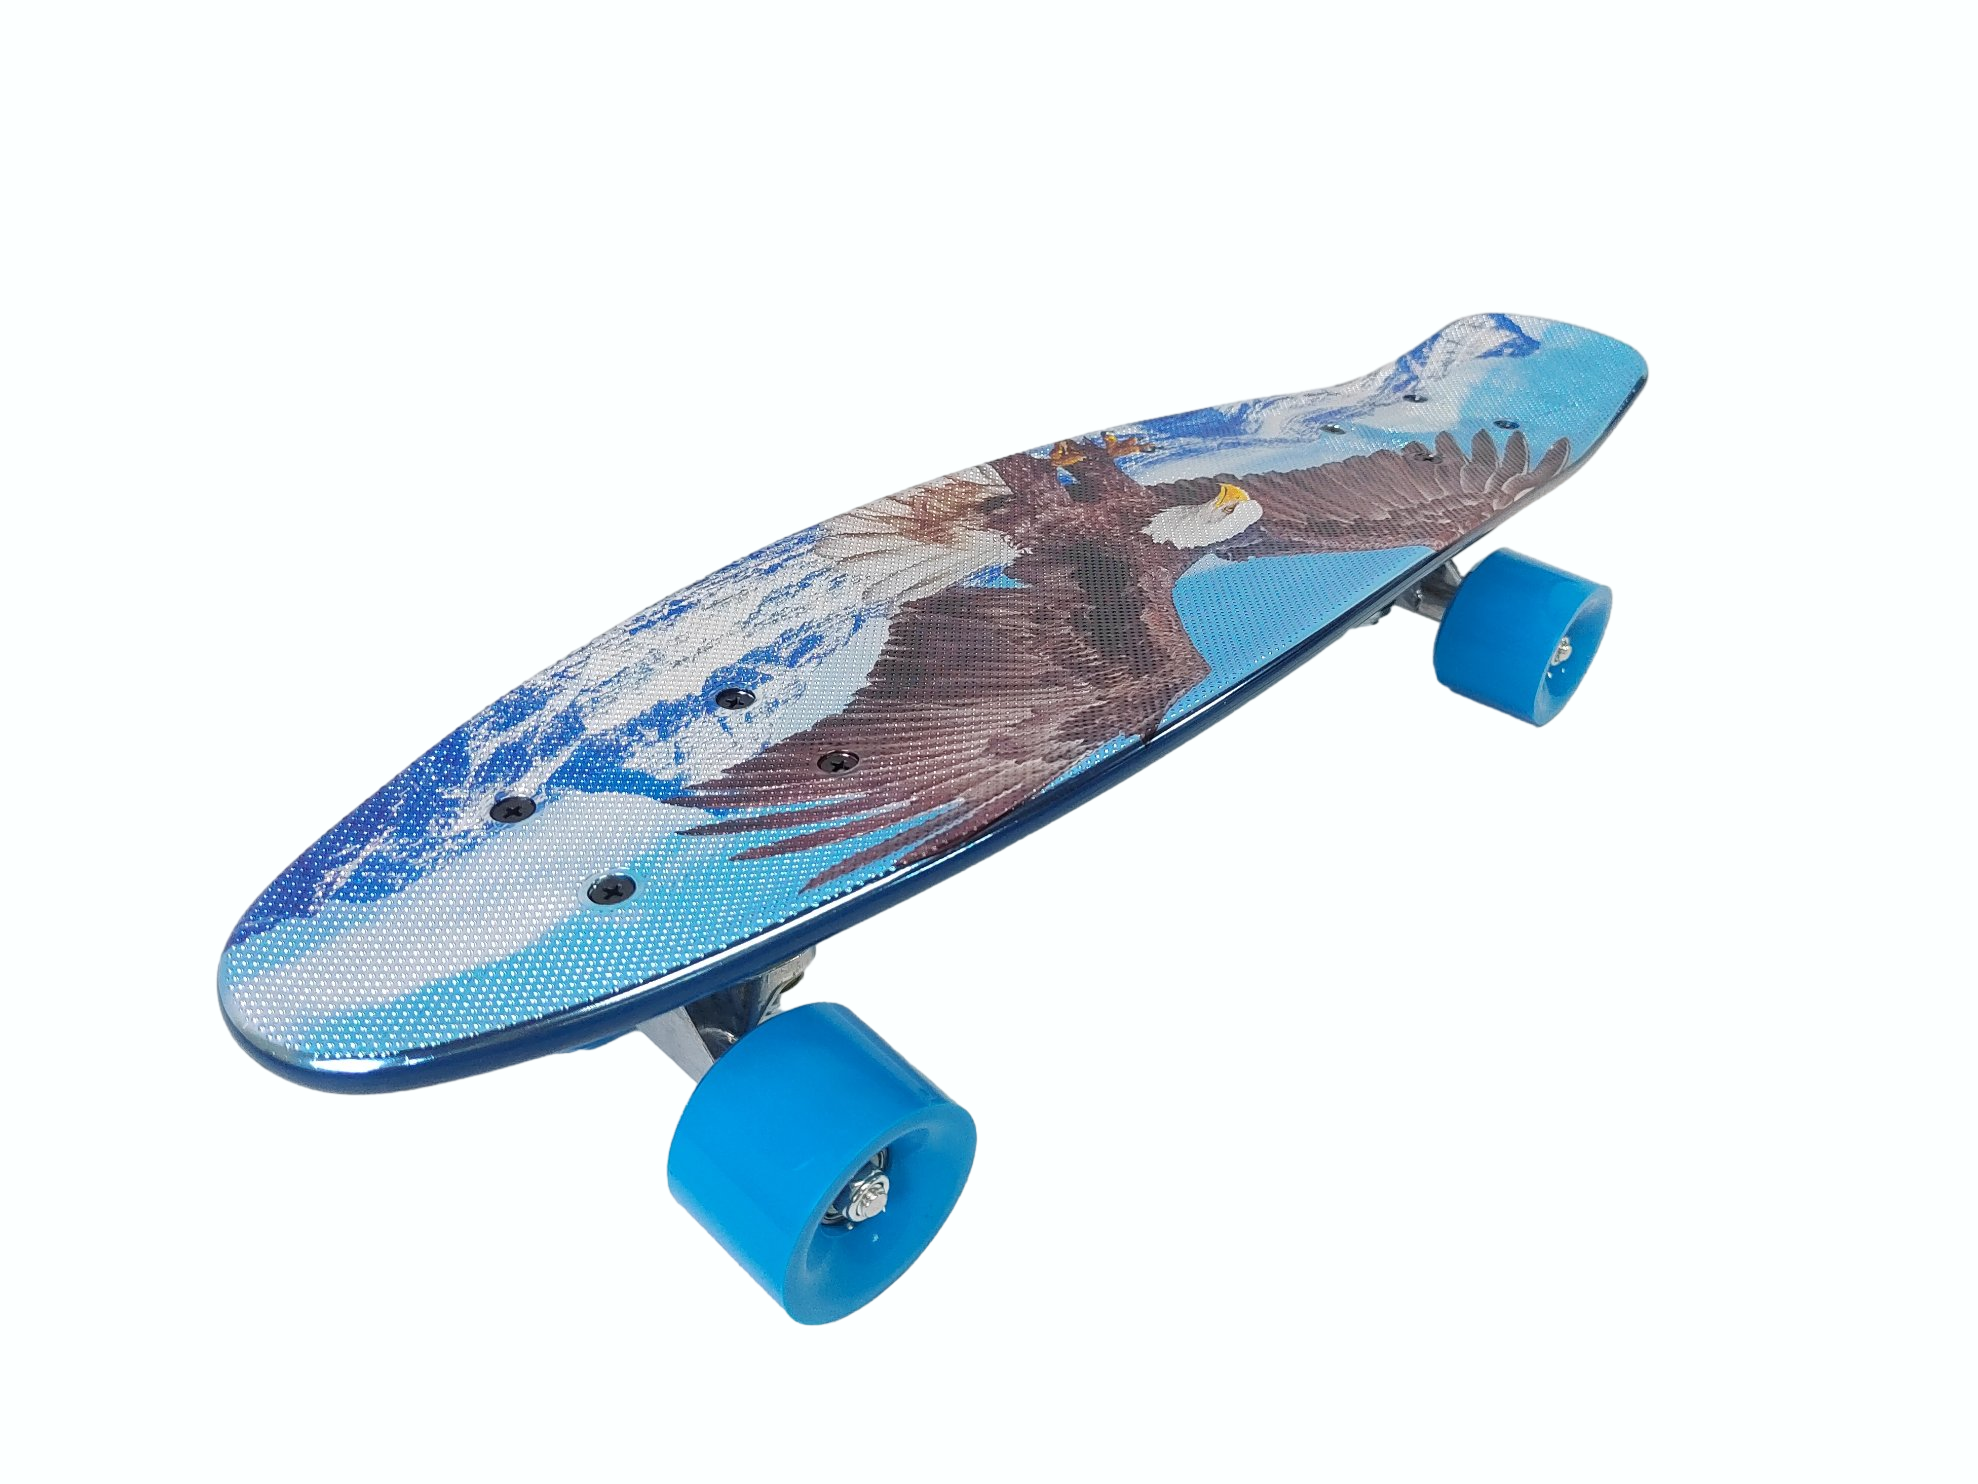 22-Inch Skateboard with Moulding Pattern (GS-SB-XD02)